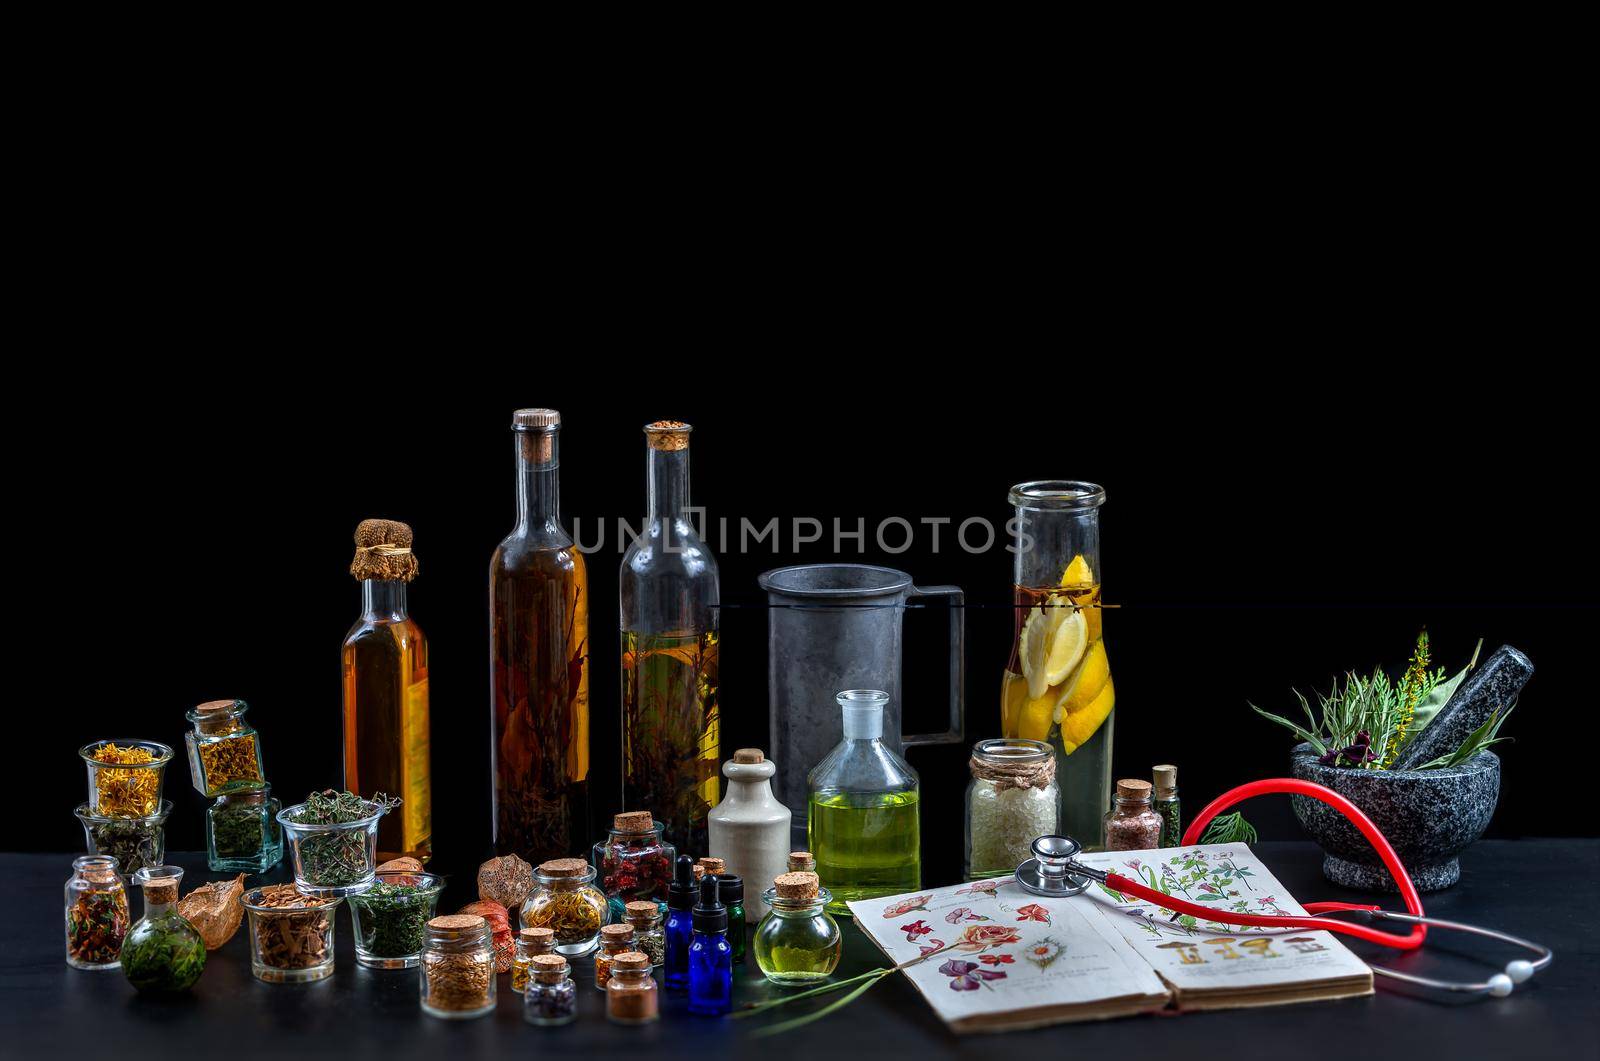 Panel of natural medicines from plants with an old book covered with stethocope